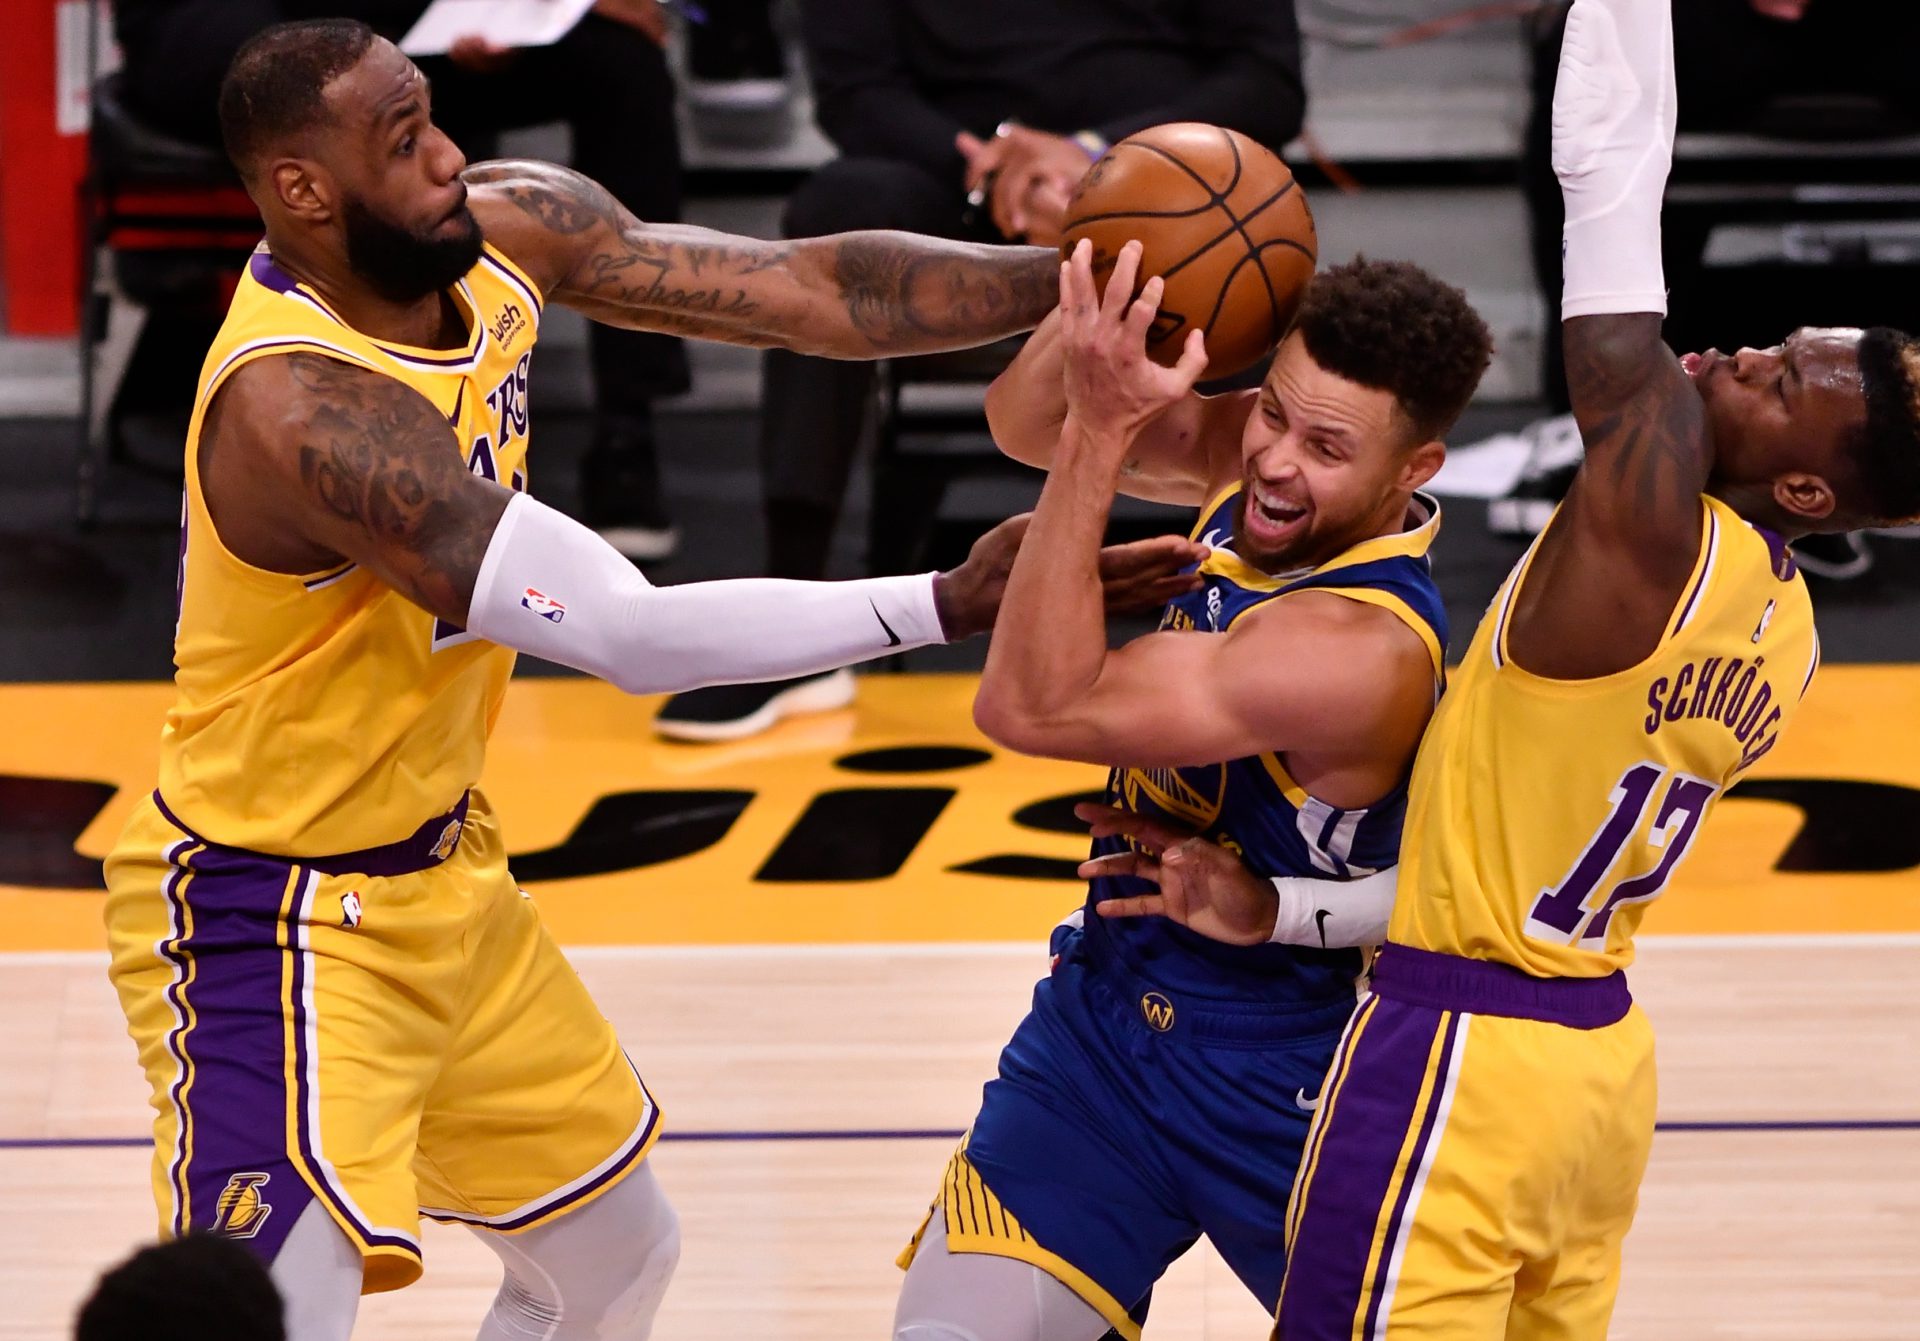 Jan 18, 2021; Los Angeles, California, USA; Golden State Warriors guard Stephen Curry (30) is sandwiched between Los Angeles Lakers forward LeBron James (23) and Los Angeles Lakers guard Dennis Schroder (17) during the third quarter at Staples Center. Mandatory Credit: Robert Hanashiro-USA TODAY Sports